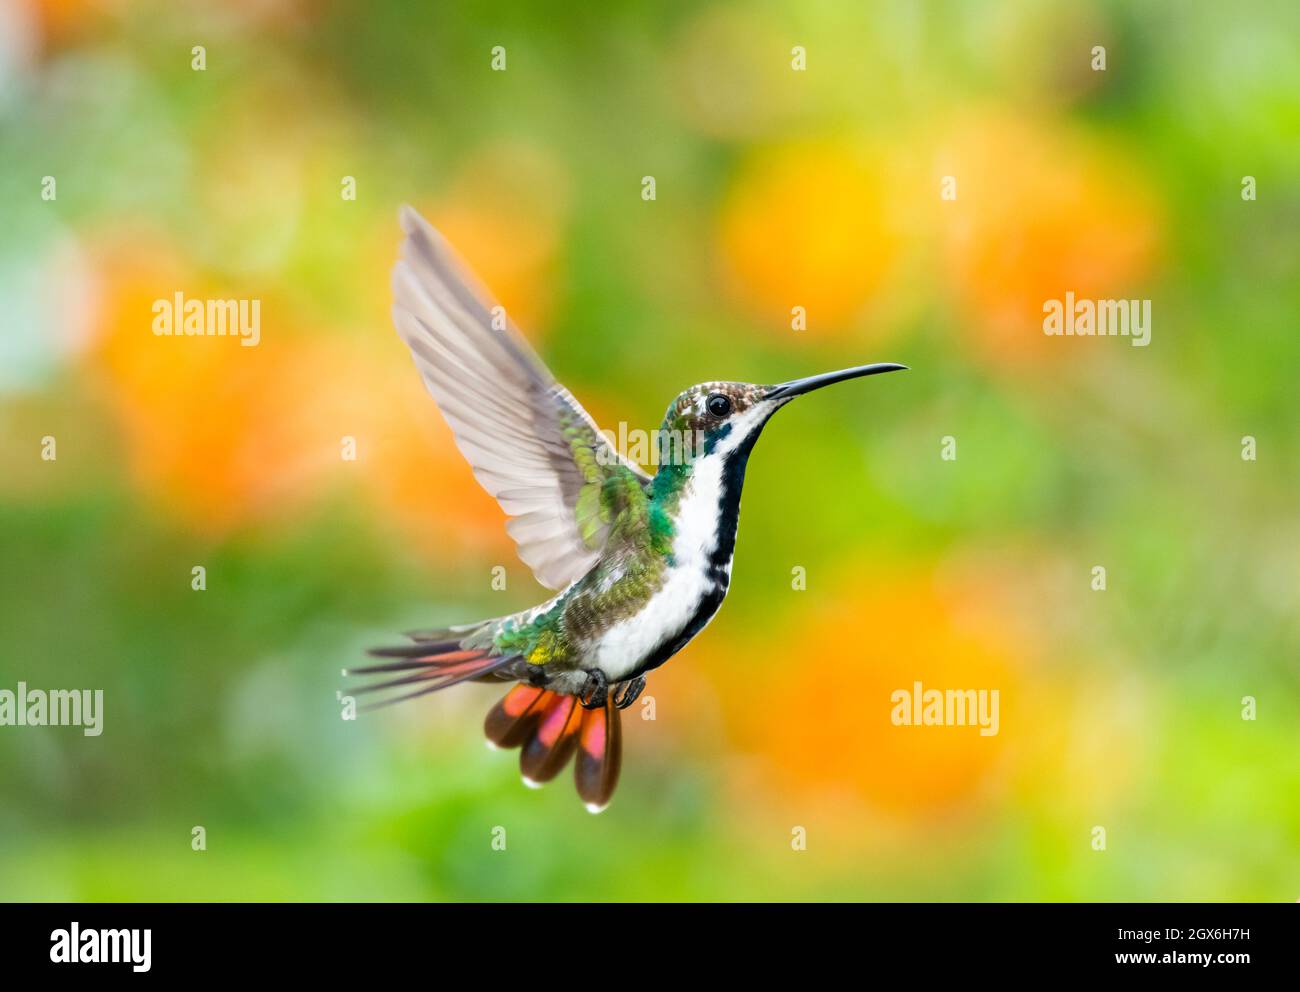 A female Black-throated Mango hummingbird, Anthracothorax Nigricollis, hovering in a unique acrobatic position with a colorful background. Stock Photo